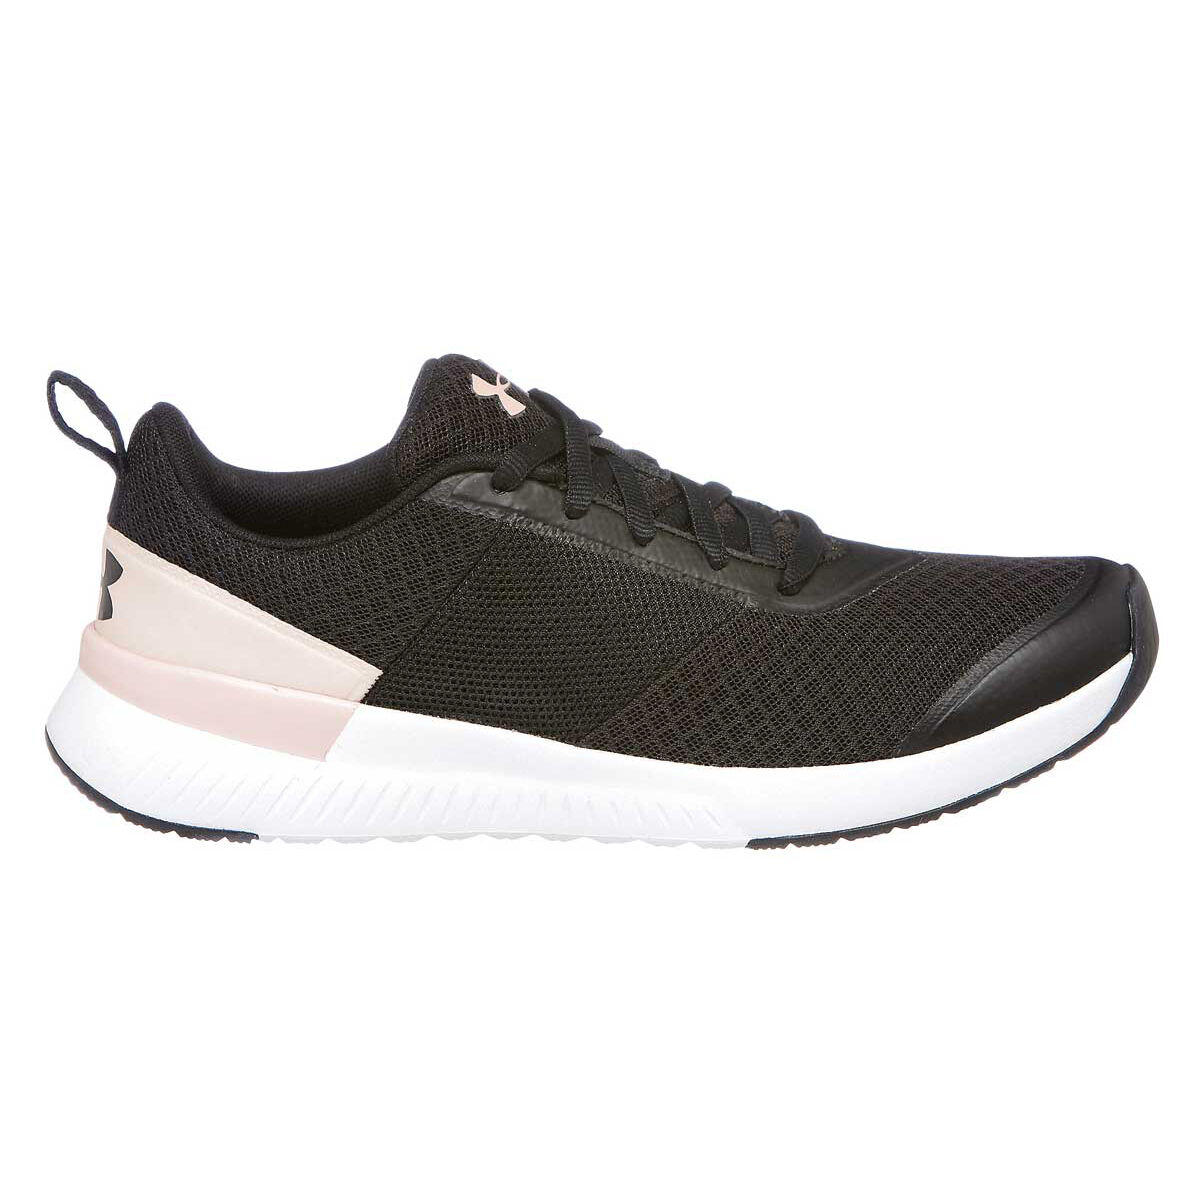 under armour women's workout shoes